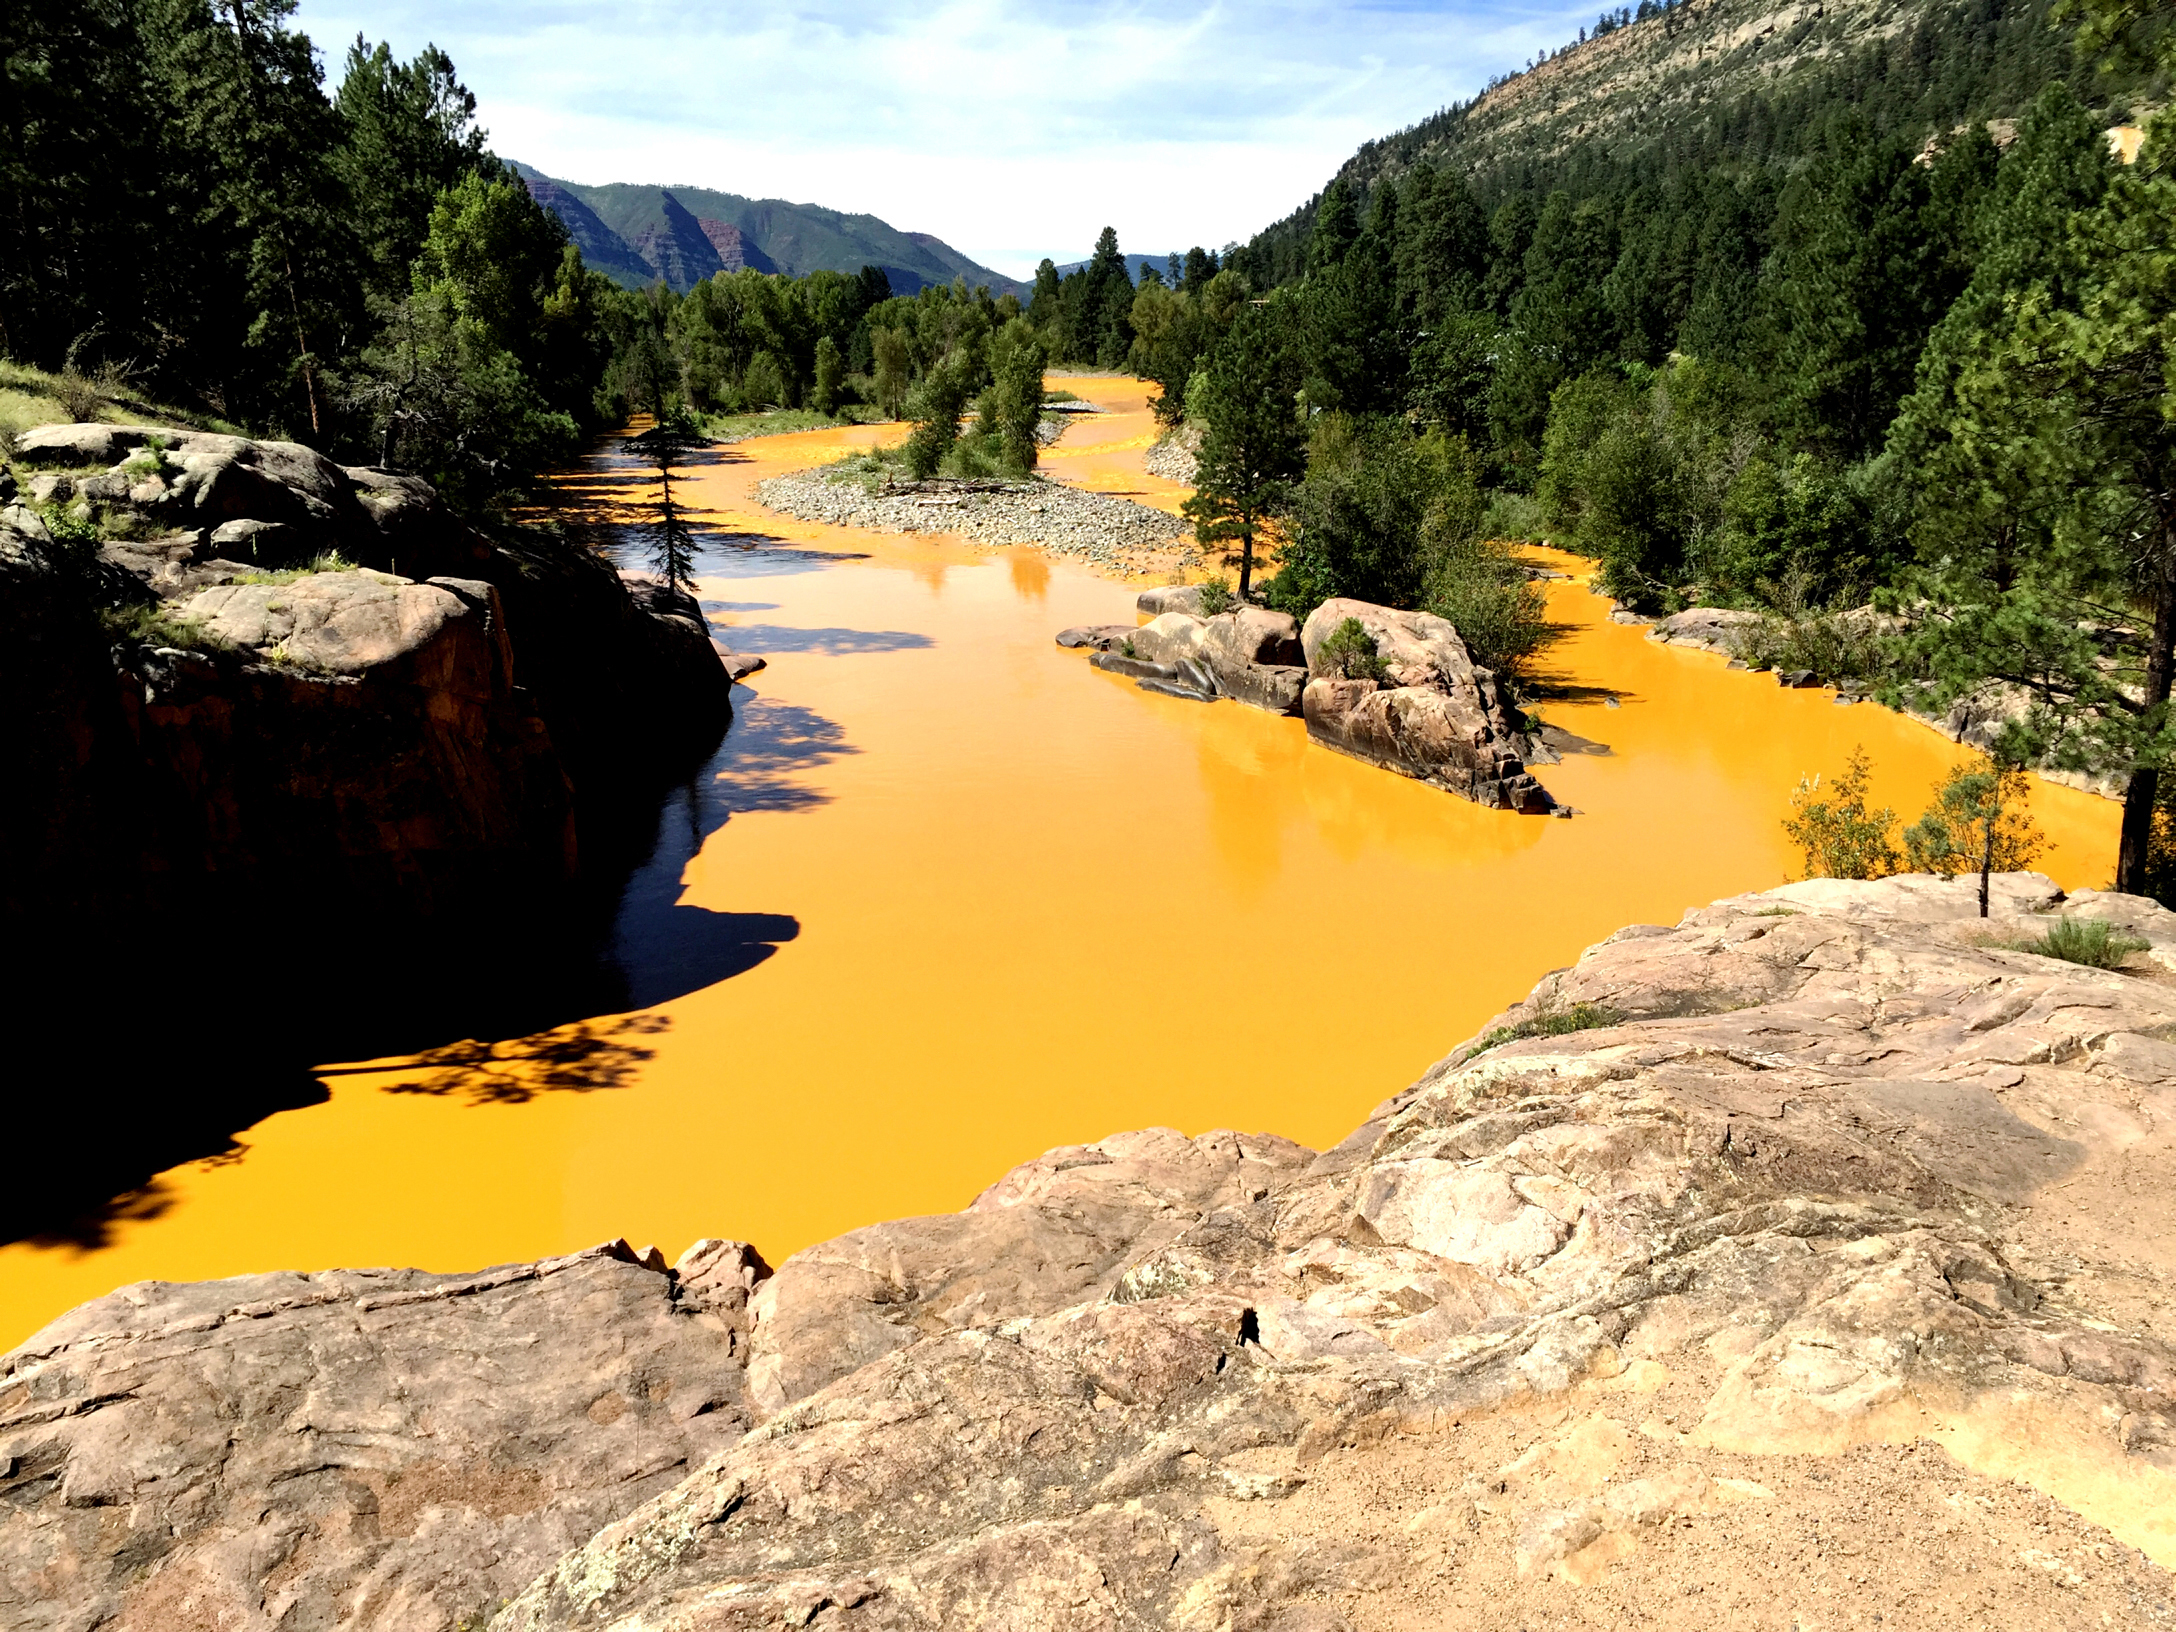 Mine waste from the Gold King Mine north of Silverton fills the Animas River at Bakers Bridge on Aug. 6, 2015 in Durango, Colo. (Jerry McBride—Durango Herald)